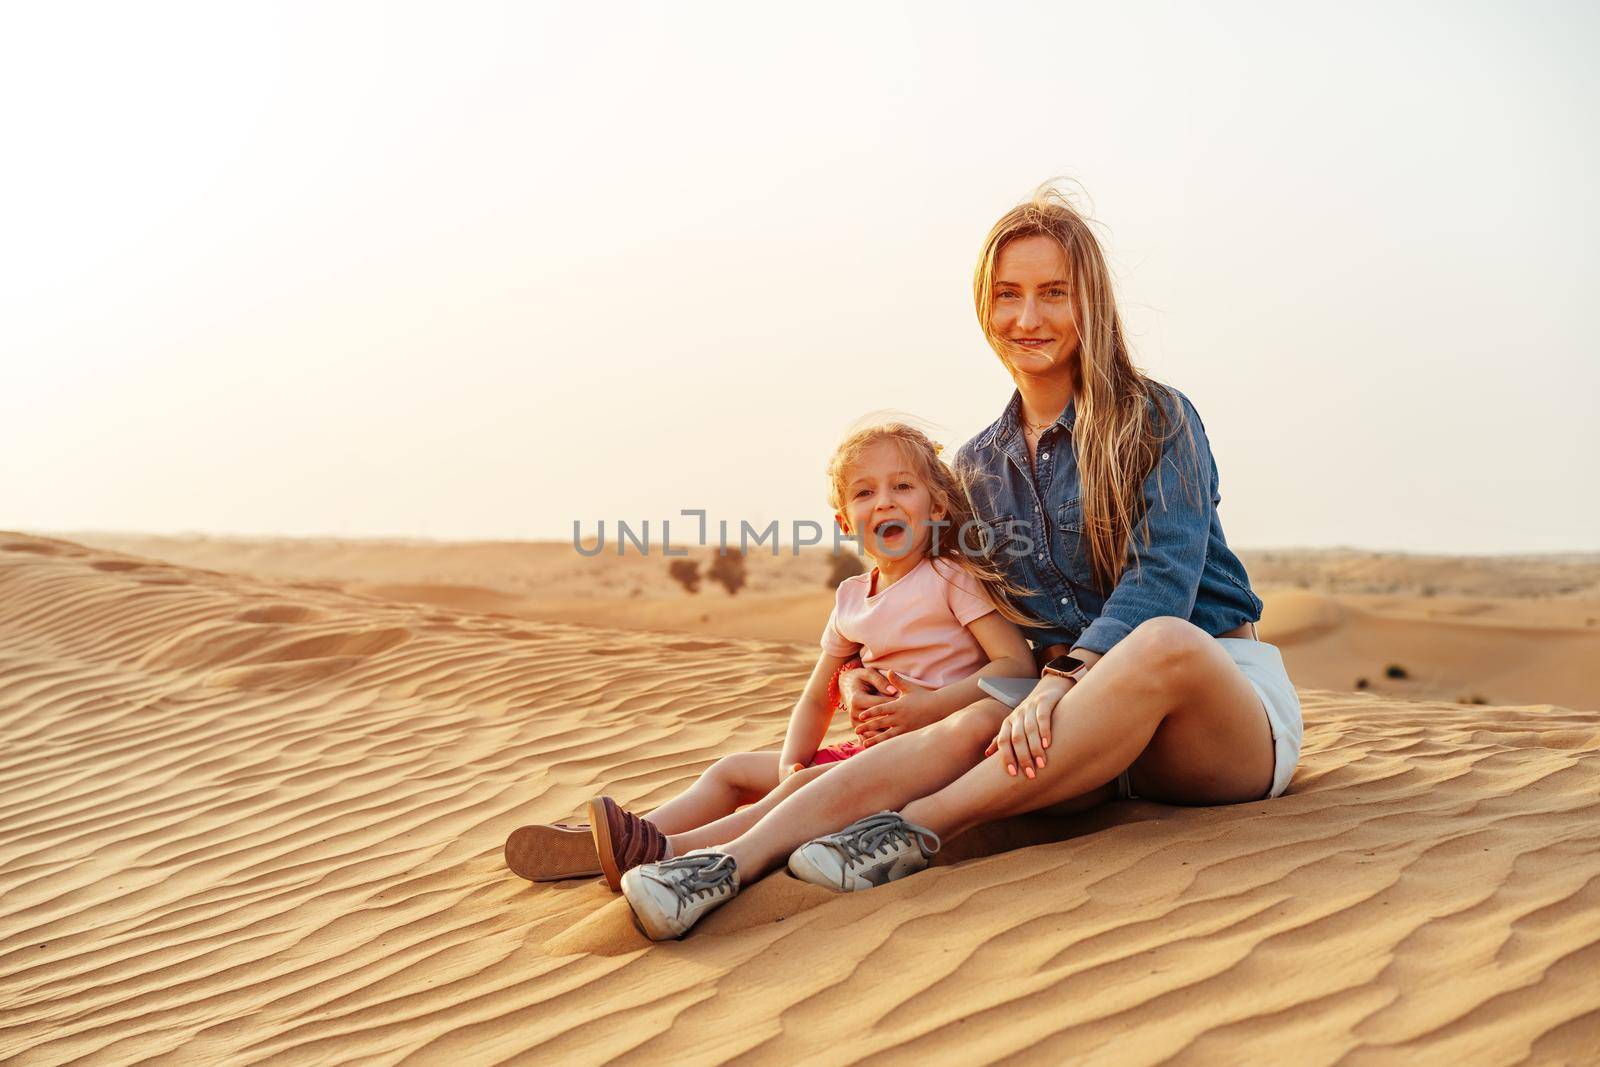 Mother and daughter sitting together on sand dune in the Dubai desert by Fabrikasimf